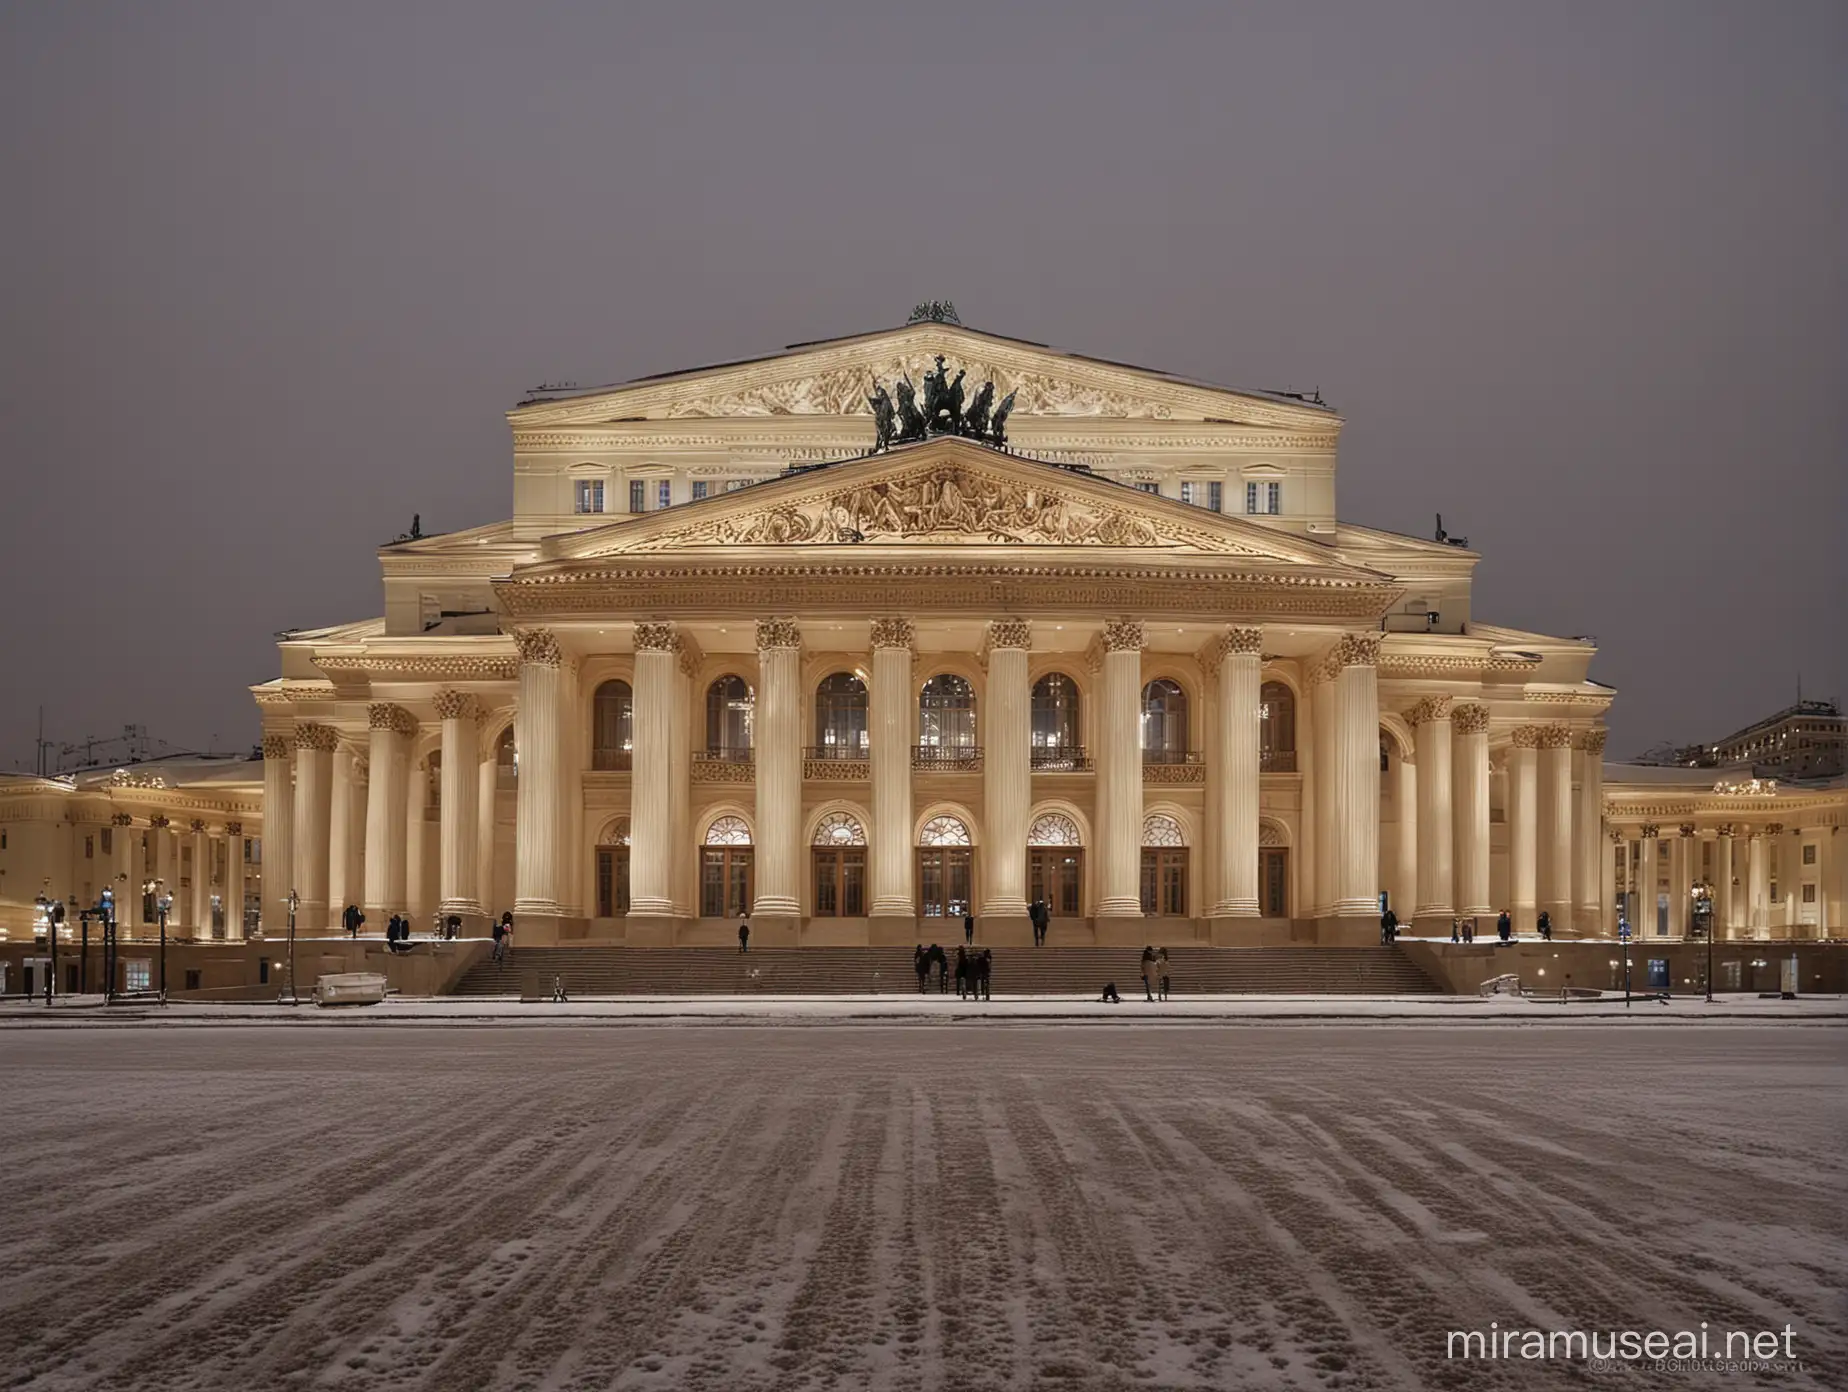 Photo of the Bolshoi Theater in Moscow at night Russian Federation